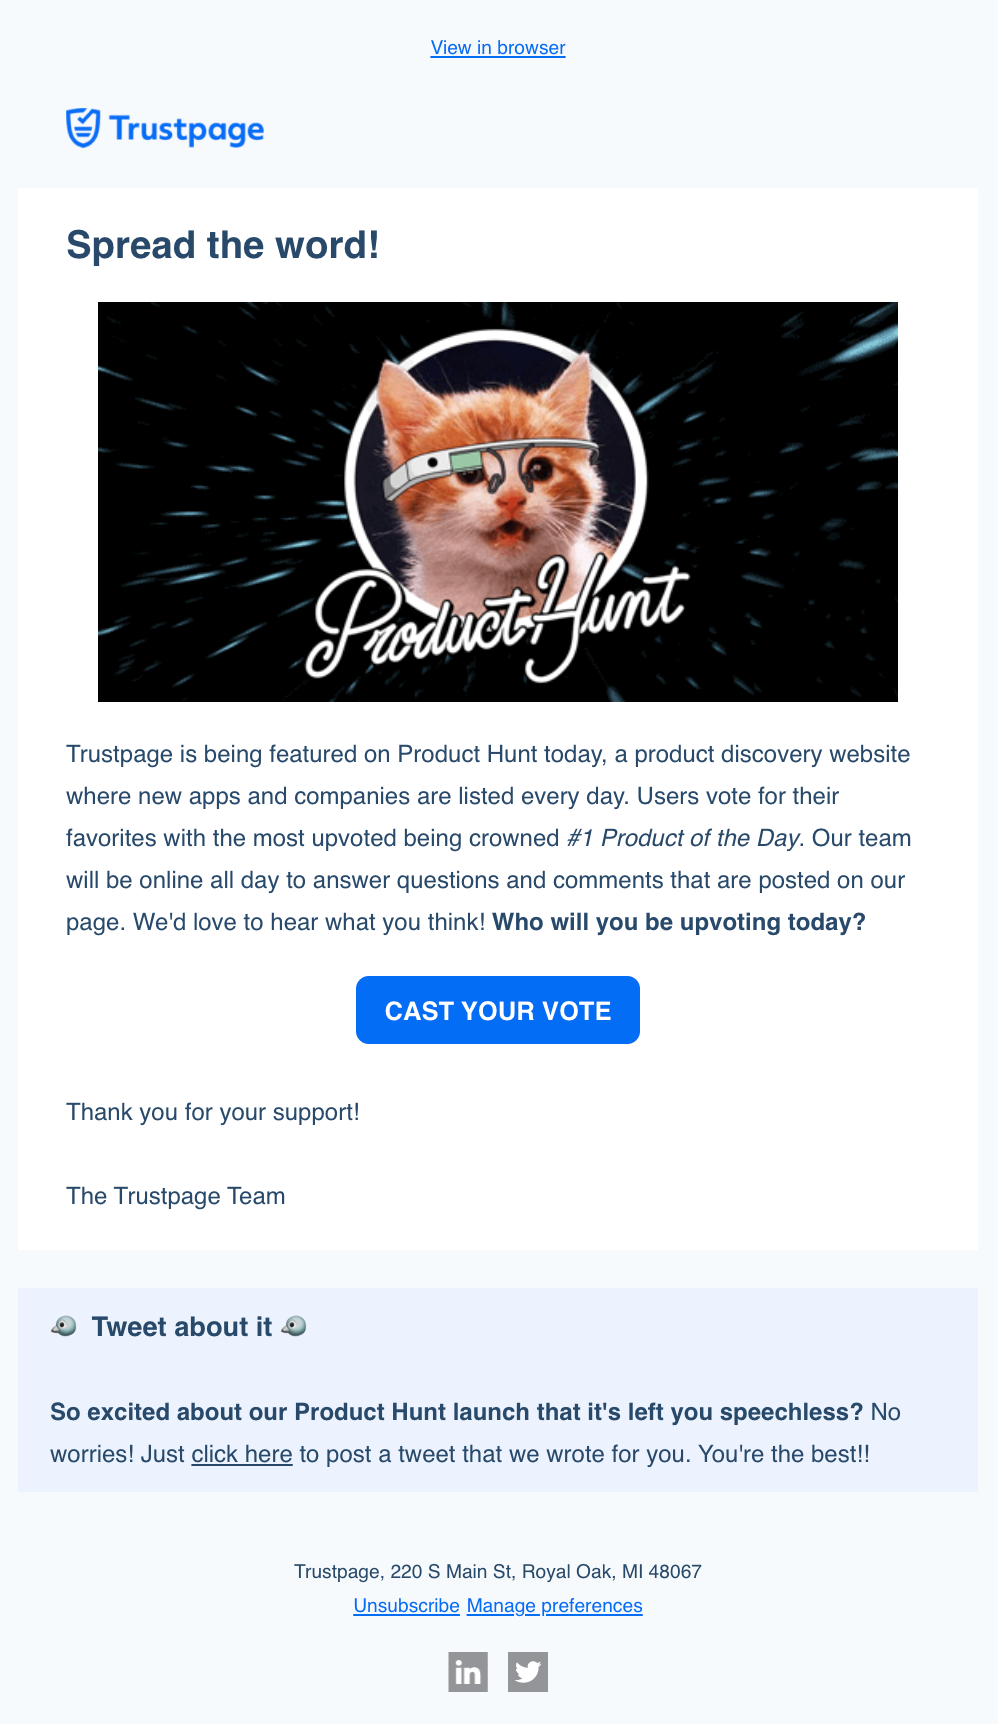 Email from Trustpage explaining that Trustpage is feature on Product Hunt and you should cast your vote today. 